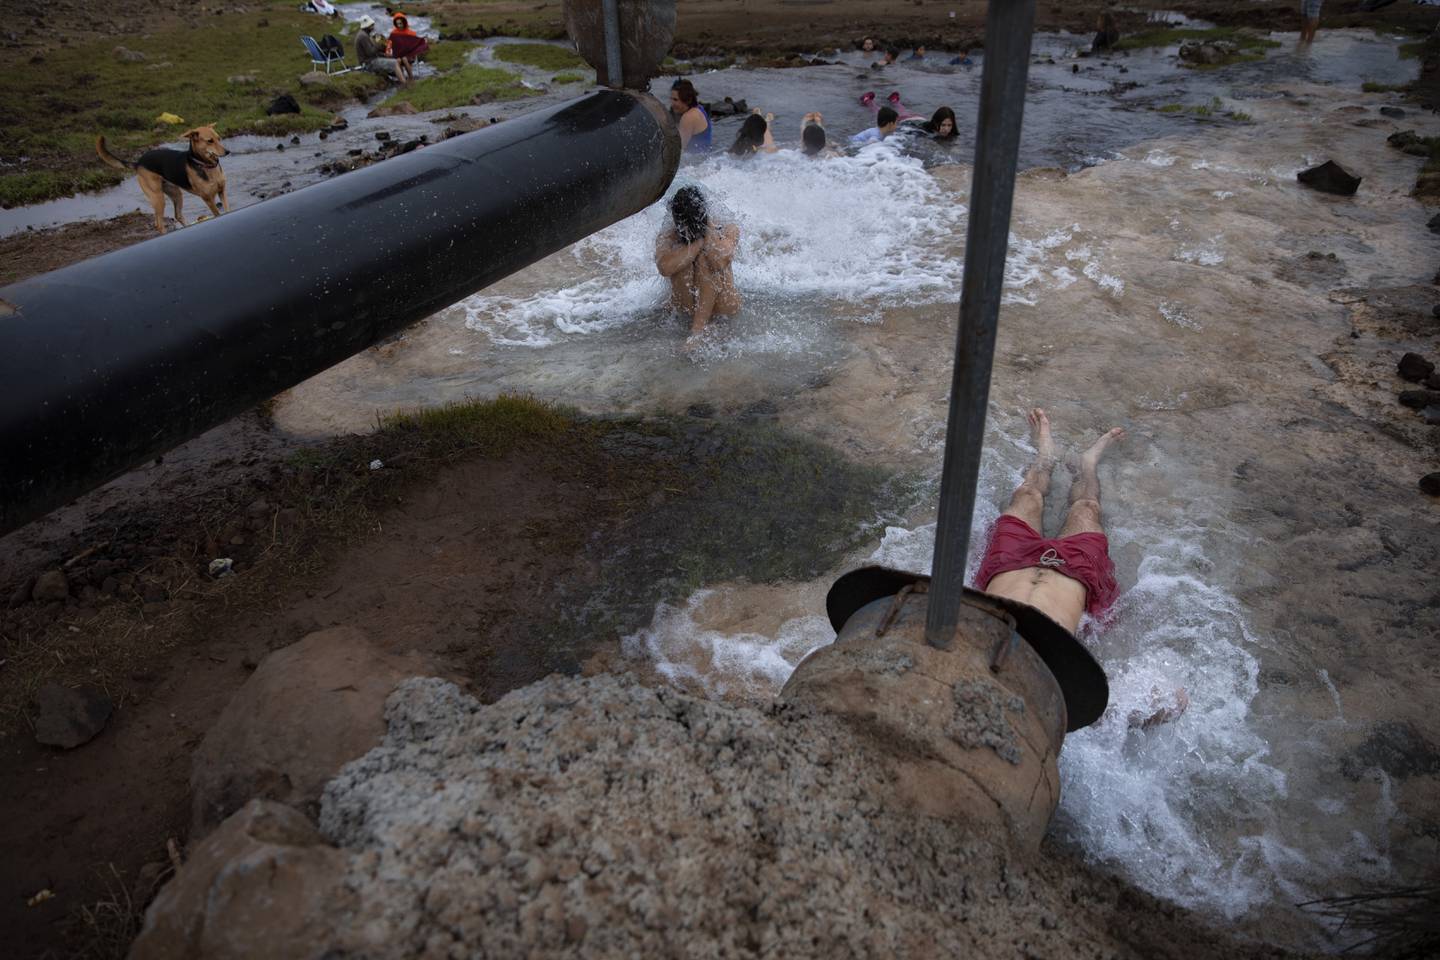 Israelis bathe in hot water coming out from a pipe at a reservoir near Mount Bental in the Israeli-controlled Golan Heights, Saturday, Dec. 4, 2021. (AP Photo/Oded Balilty)